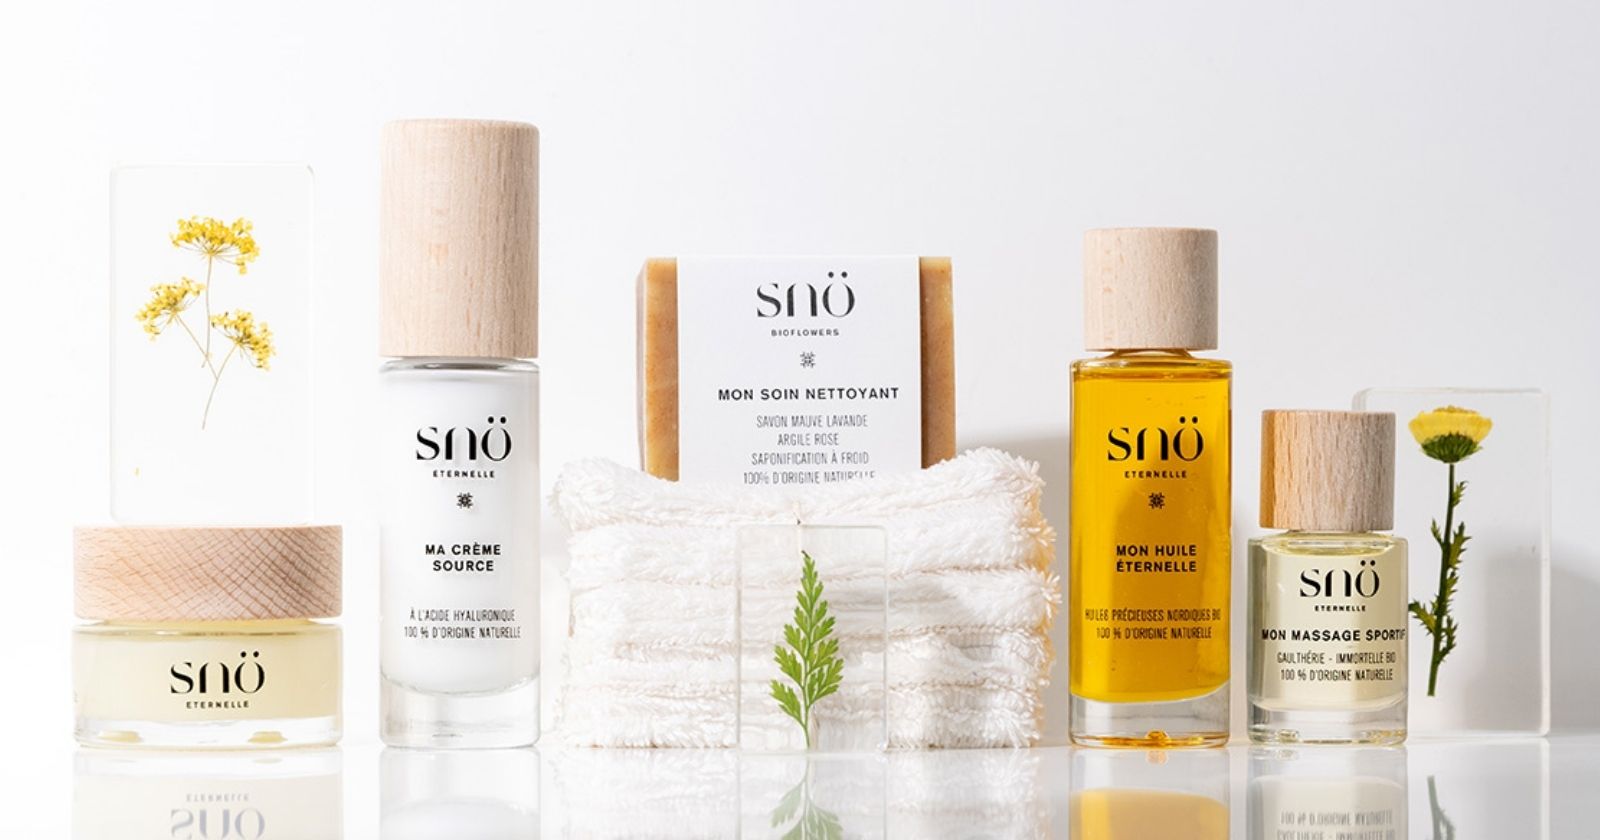 SNÖ Eternelle: 100% natural and French care for sensitive skin